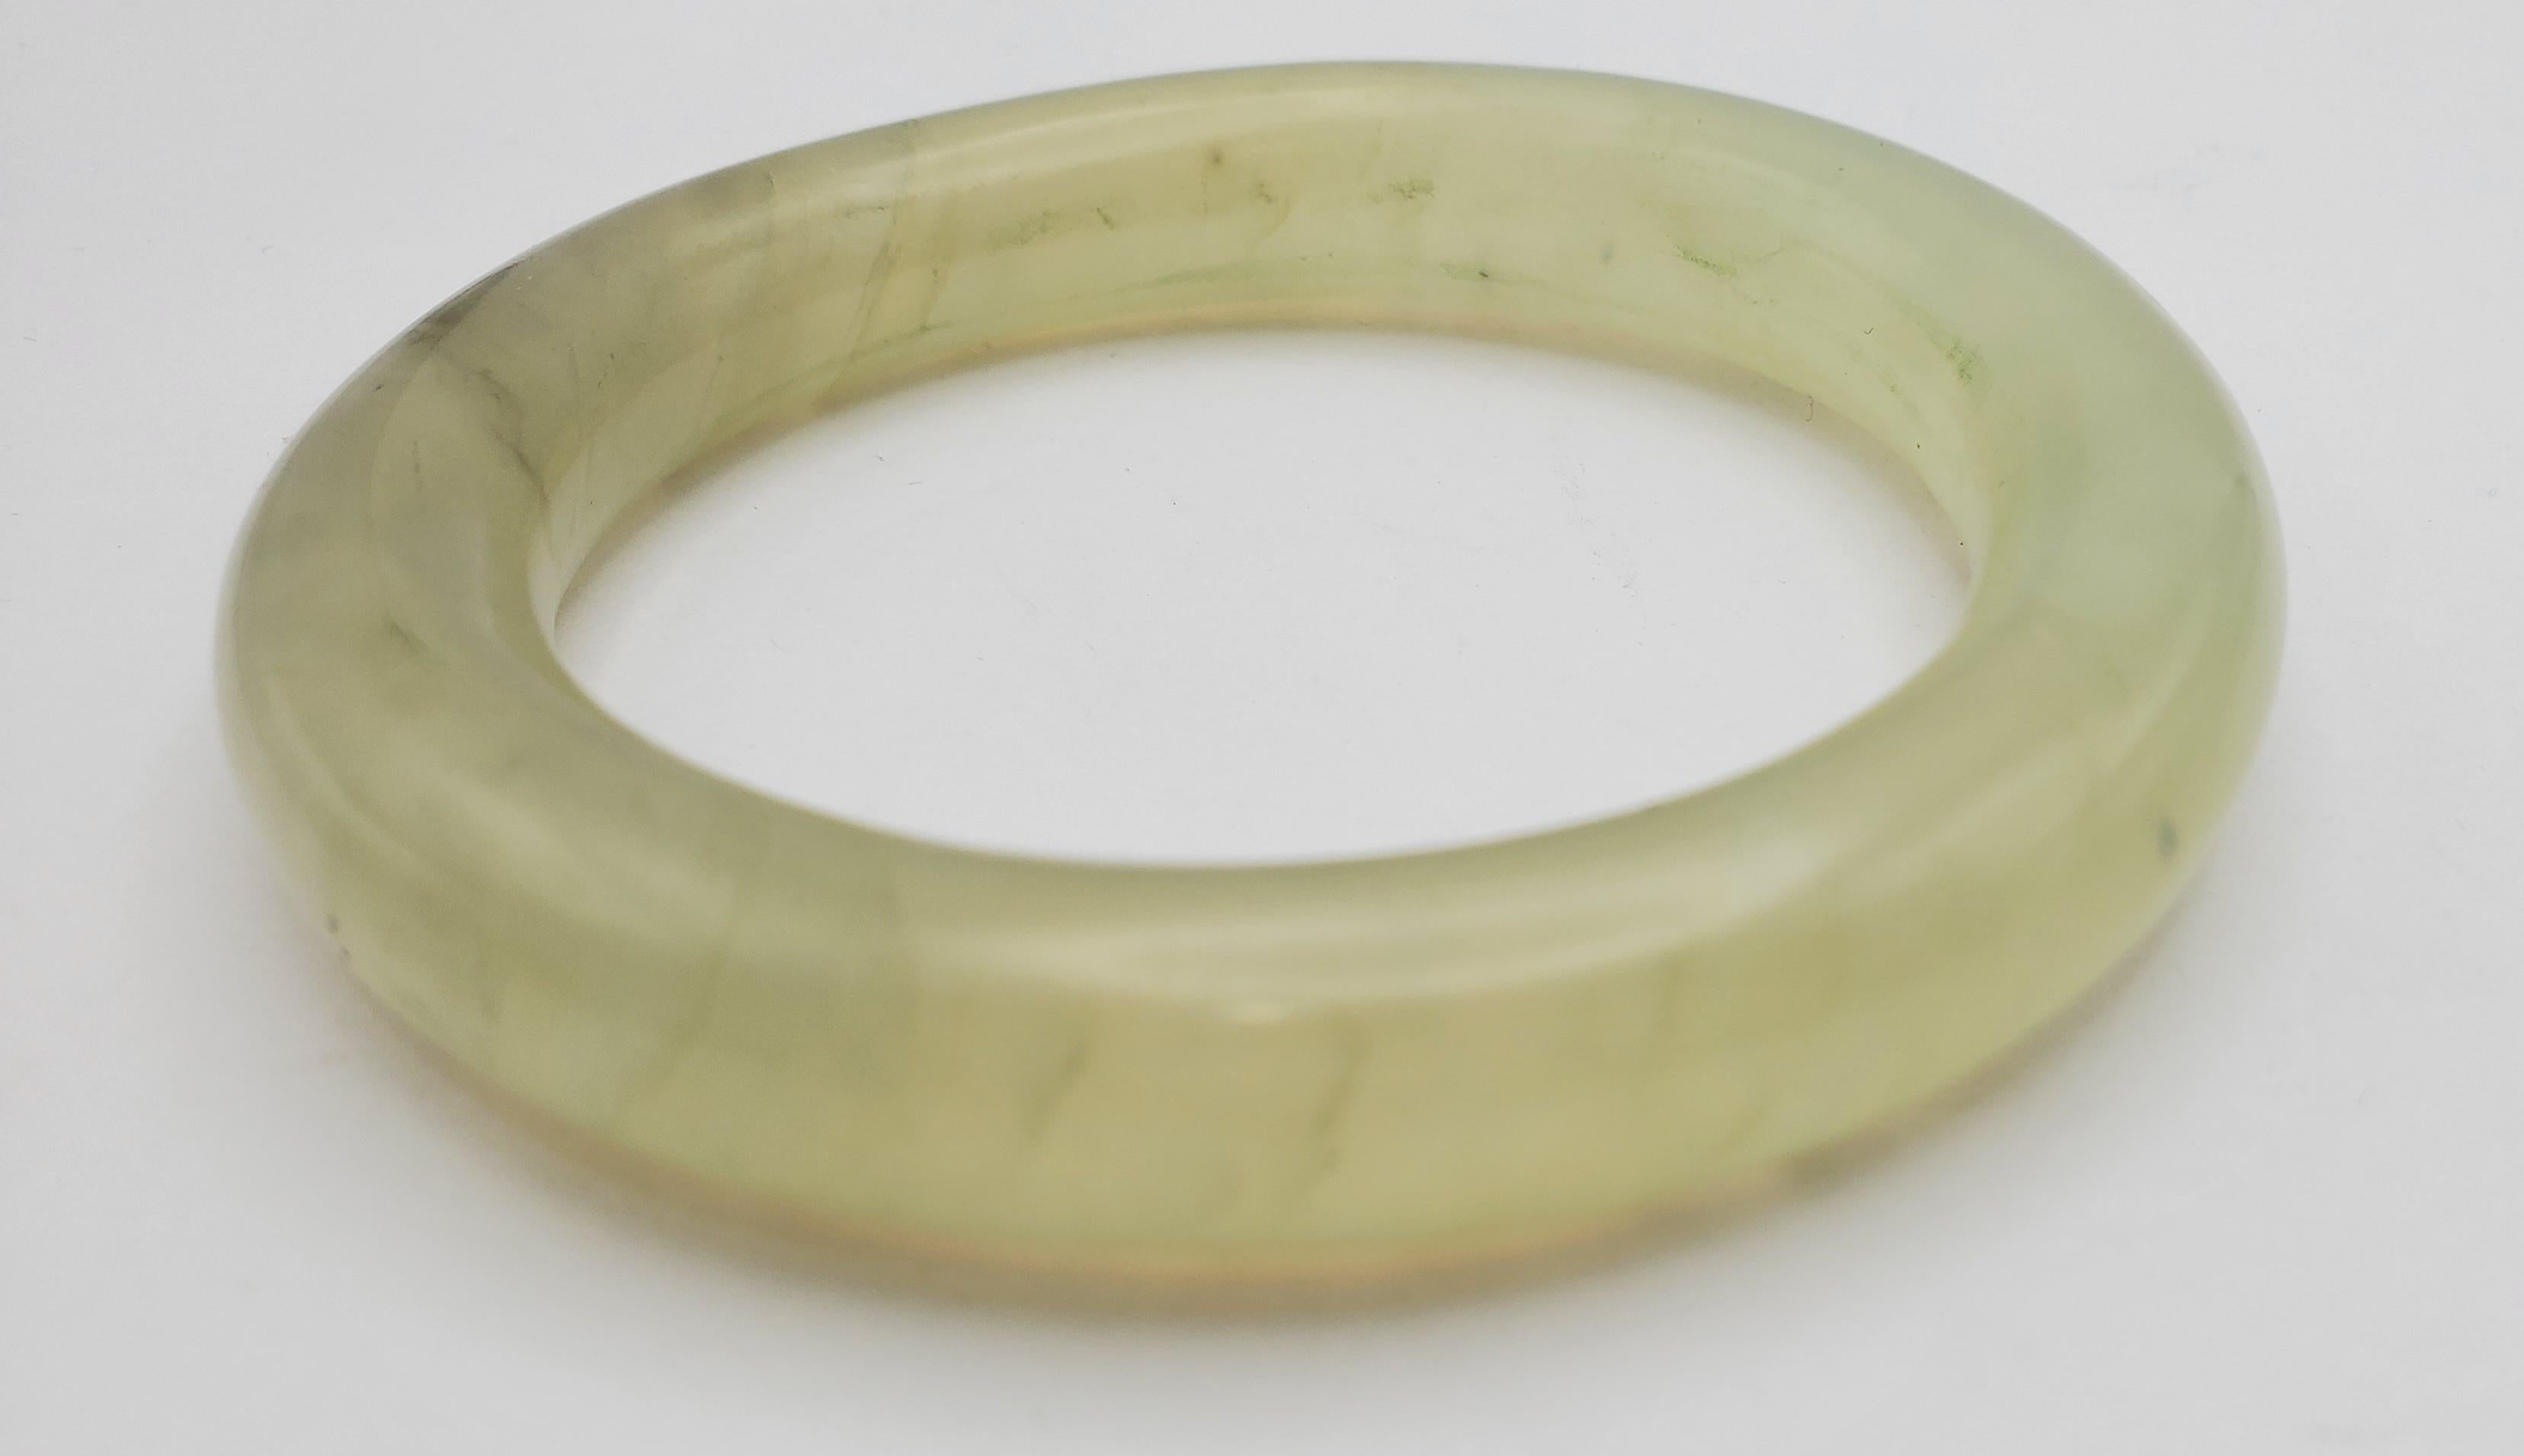 This beautiful natural Serpentine/Bowenite bangle has a translucent pale greenish color. The bangle is smooth on all surfaces to highlight the natural properties of the stone. Serpentine or Bowenite has recently been referred to as 